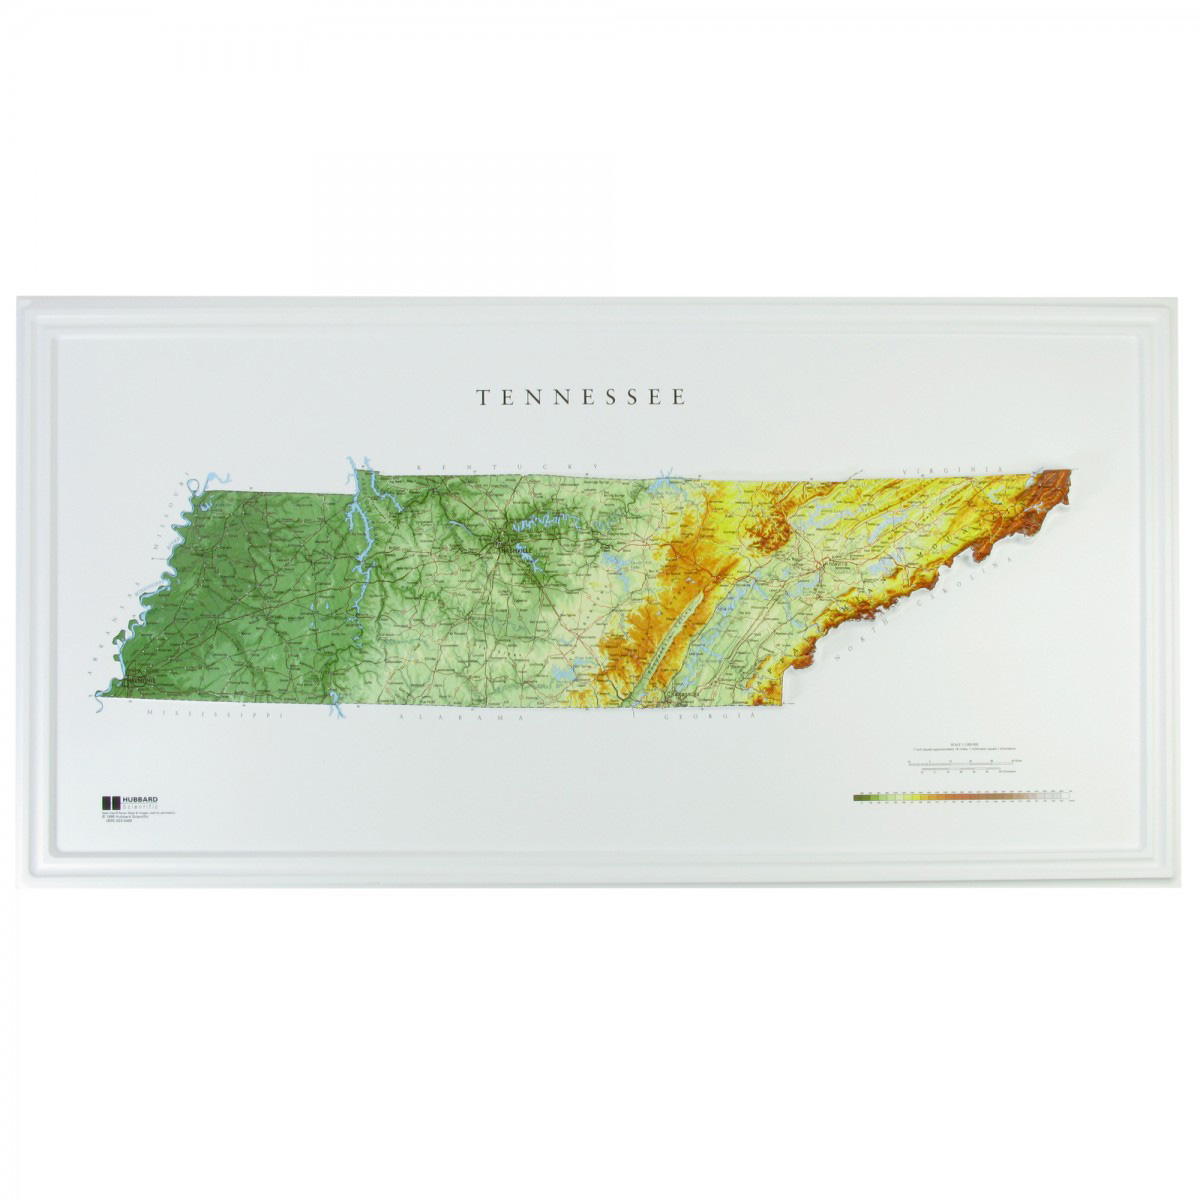 Picture of TestPlay 3071 36 x 18 in. Tennessee State Raised Relief Map, Unframed - Large